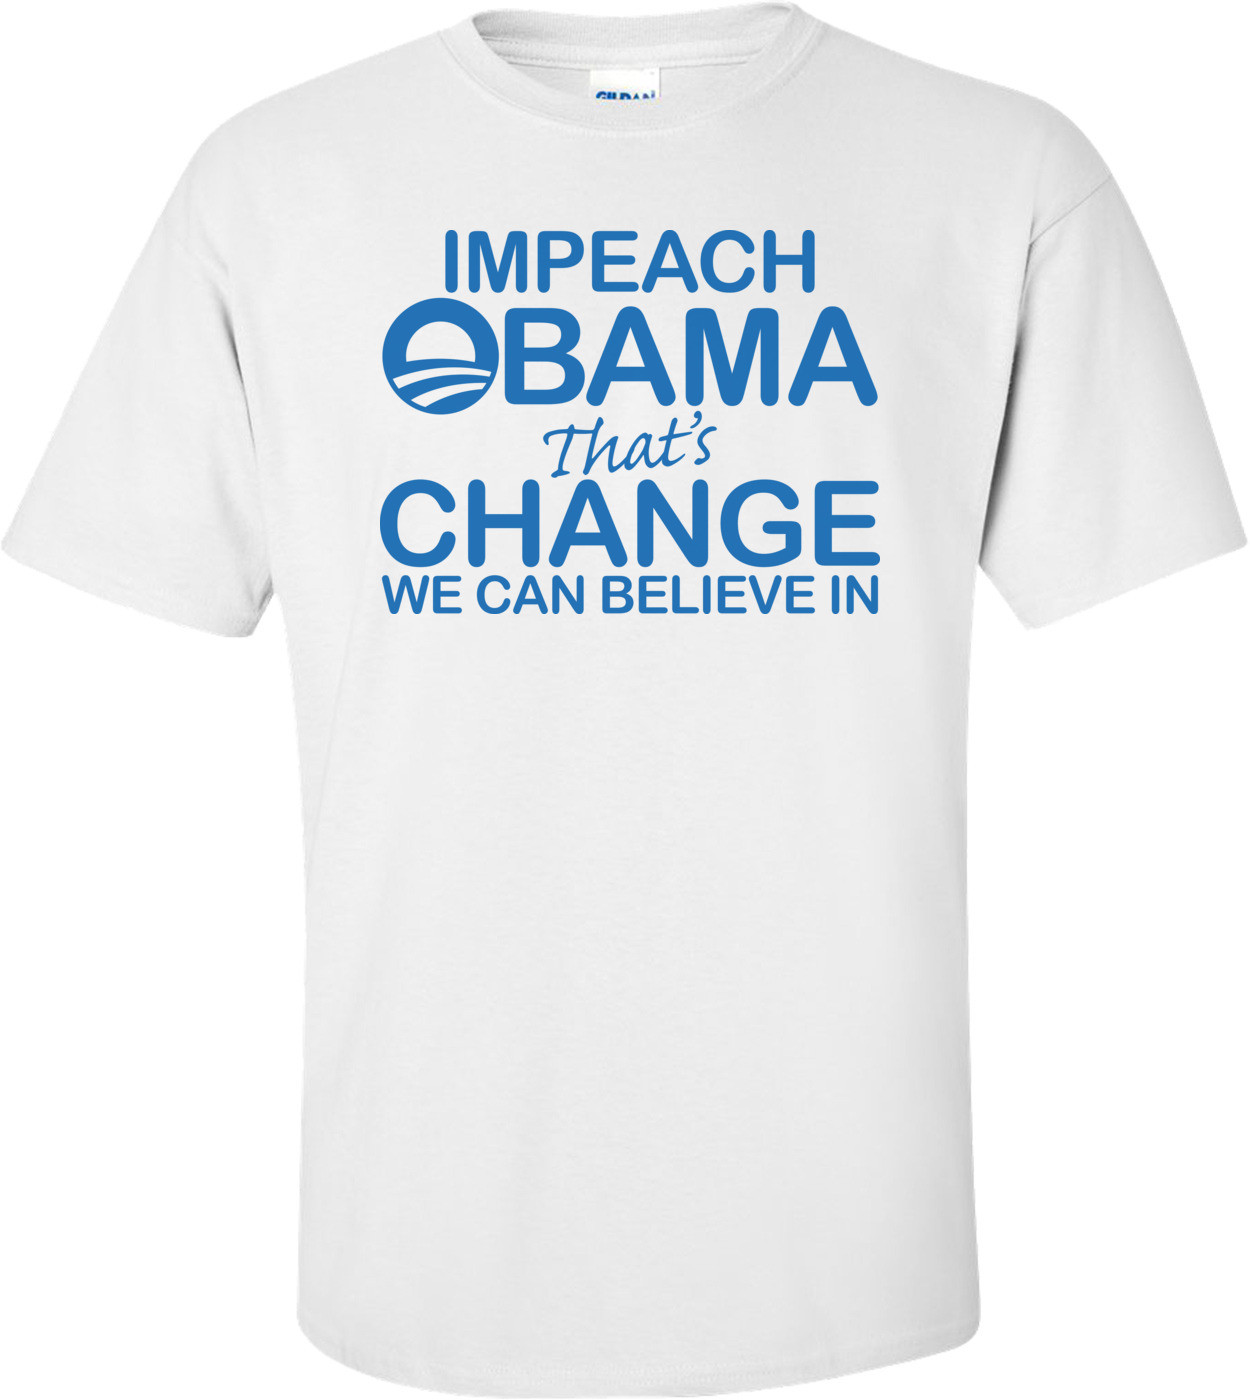 Impeach Obama That's Change We Can Believe In Anti Obama T-shirt